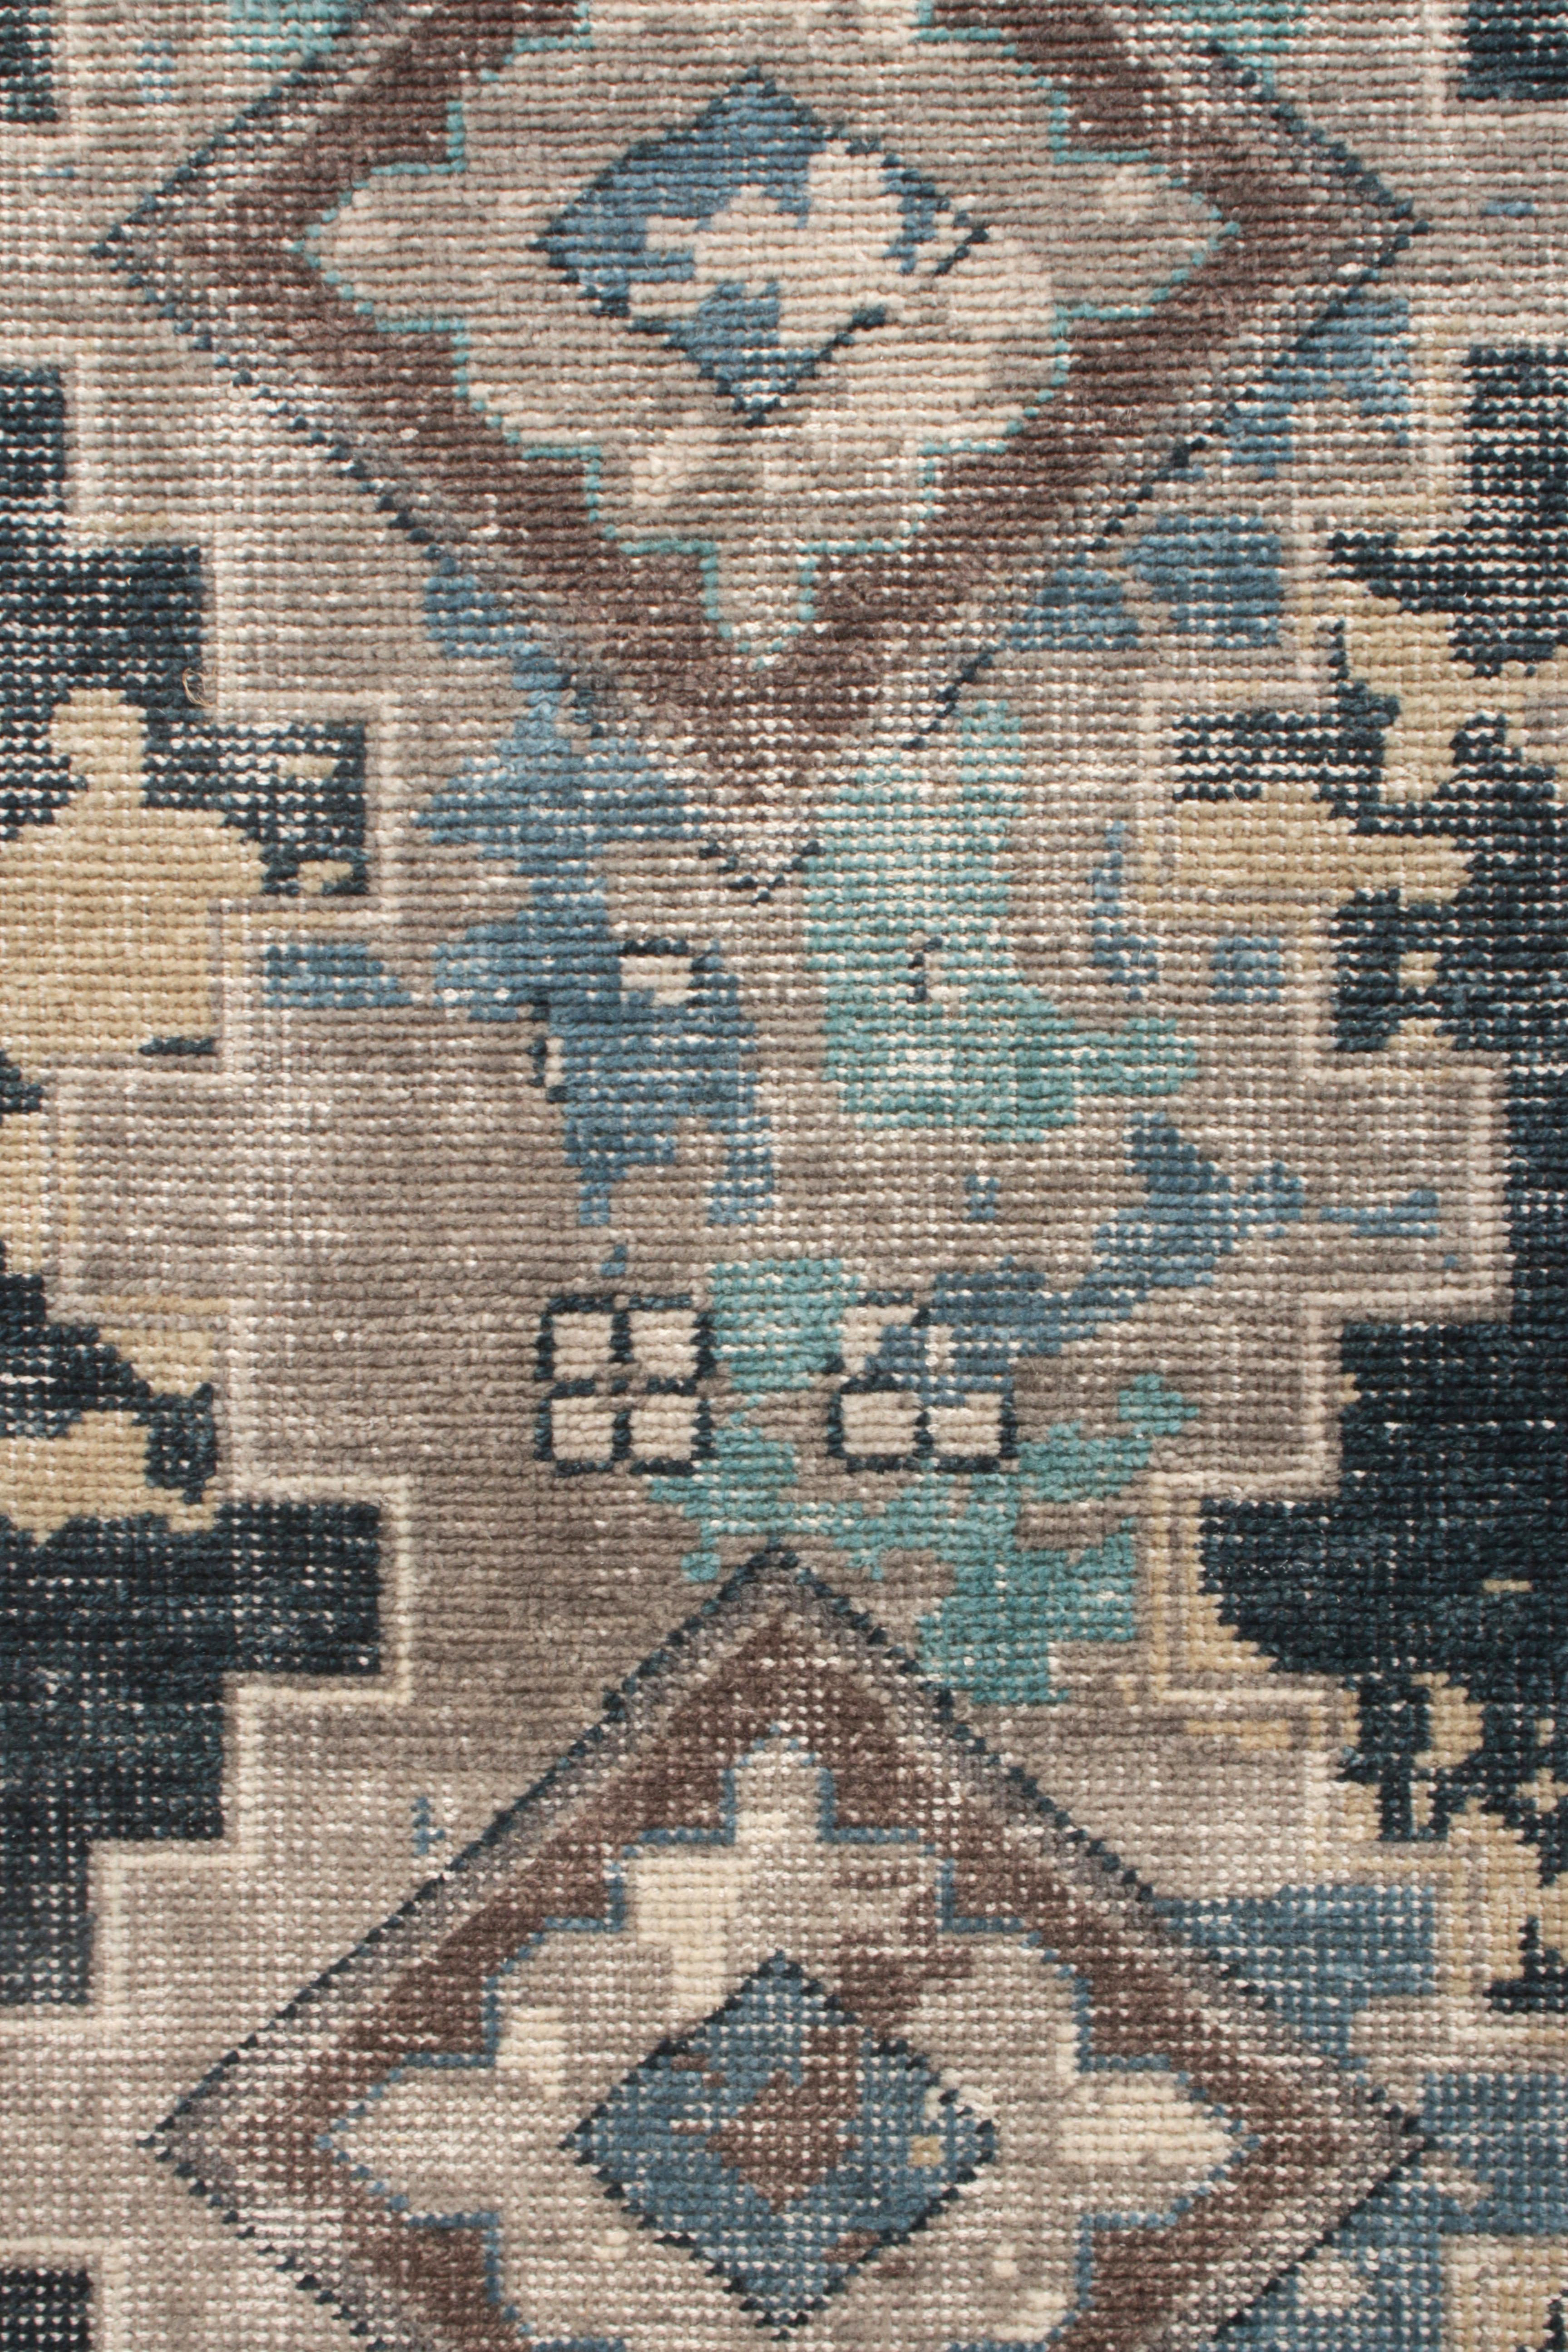 Indian Rug & Kilim’s Distressed Style Rug in Blue, Beige-Brown Geometric Pattern For Sale